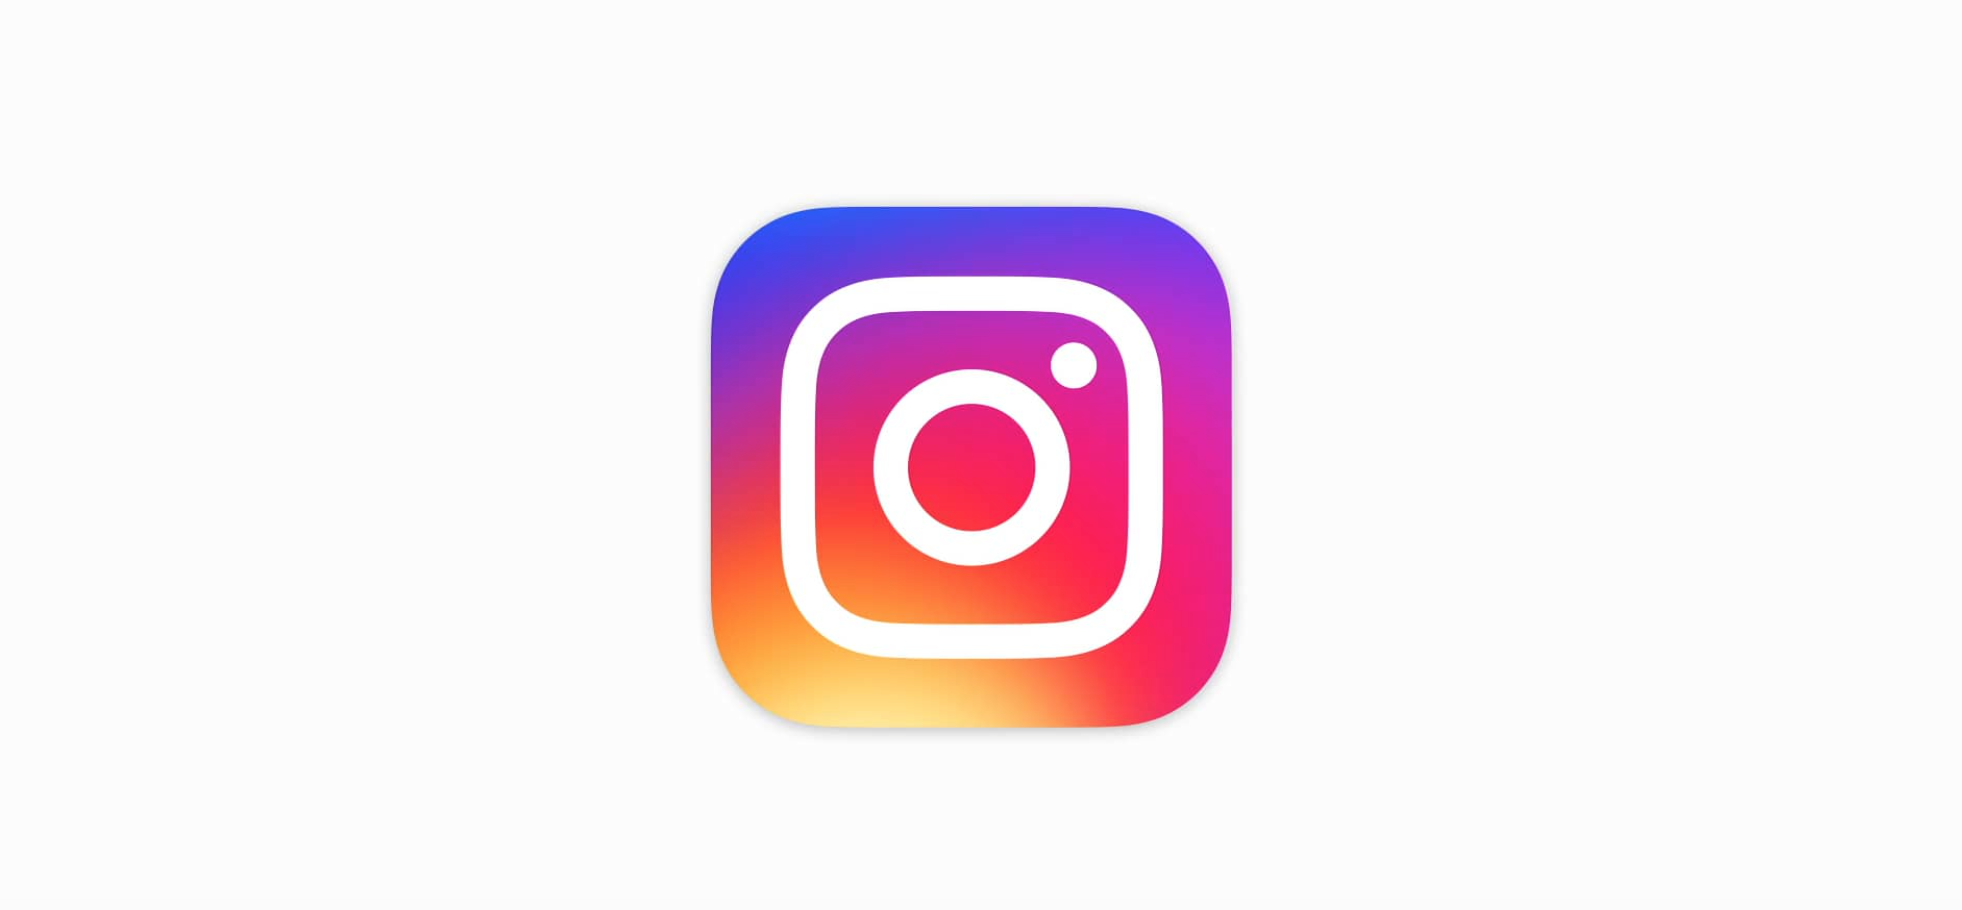 small instagram logo for business cards 4